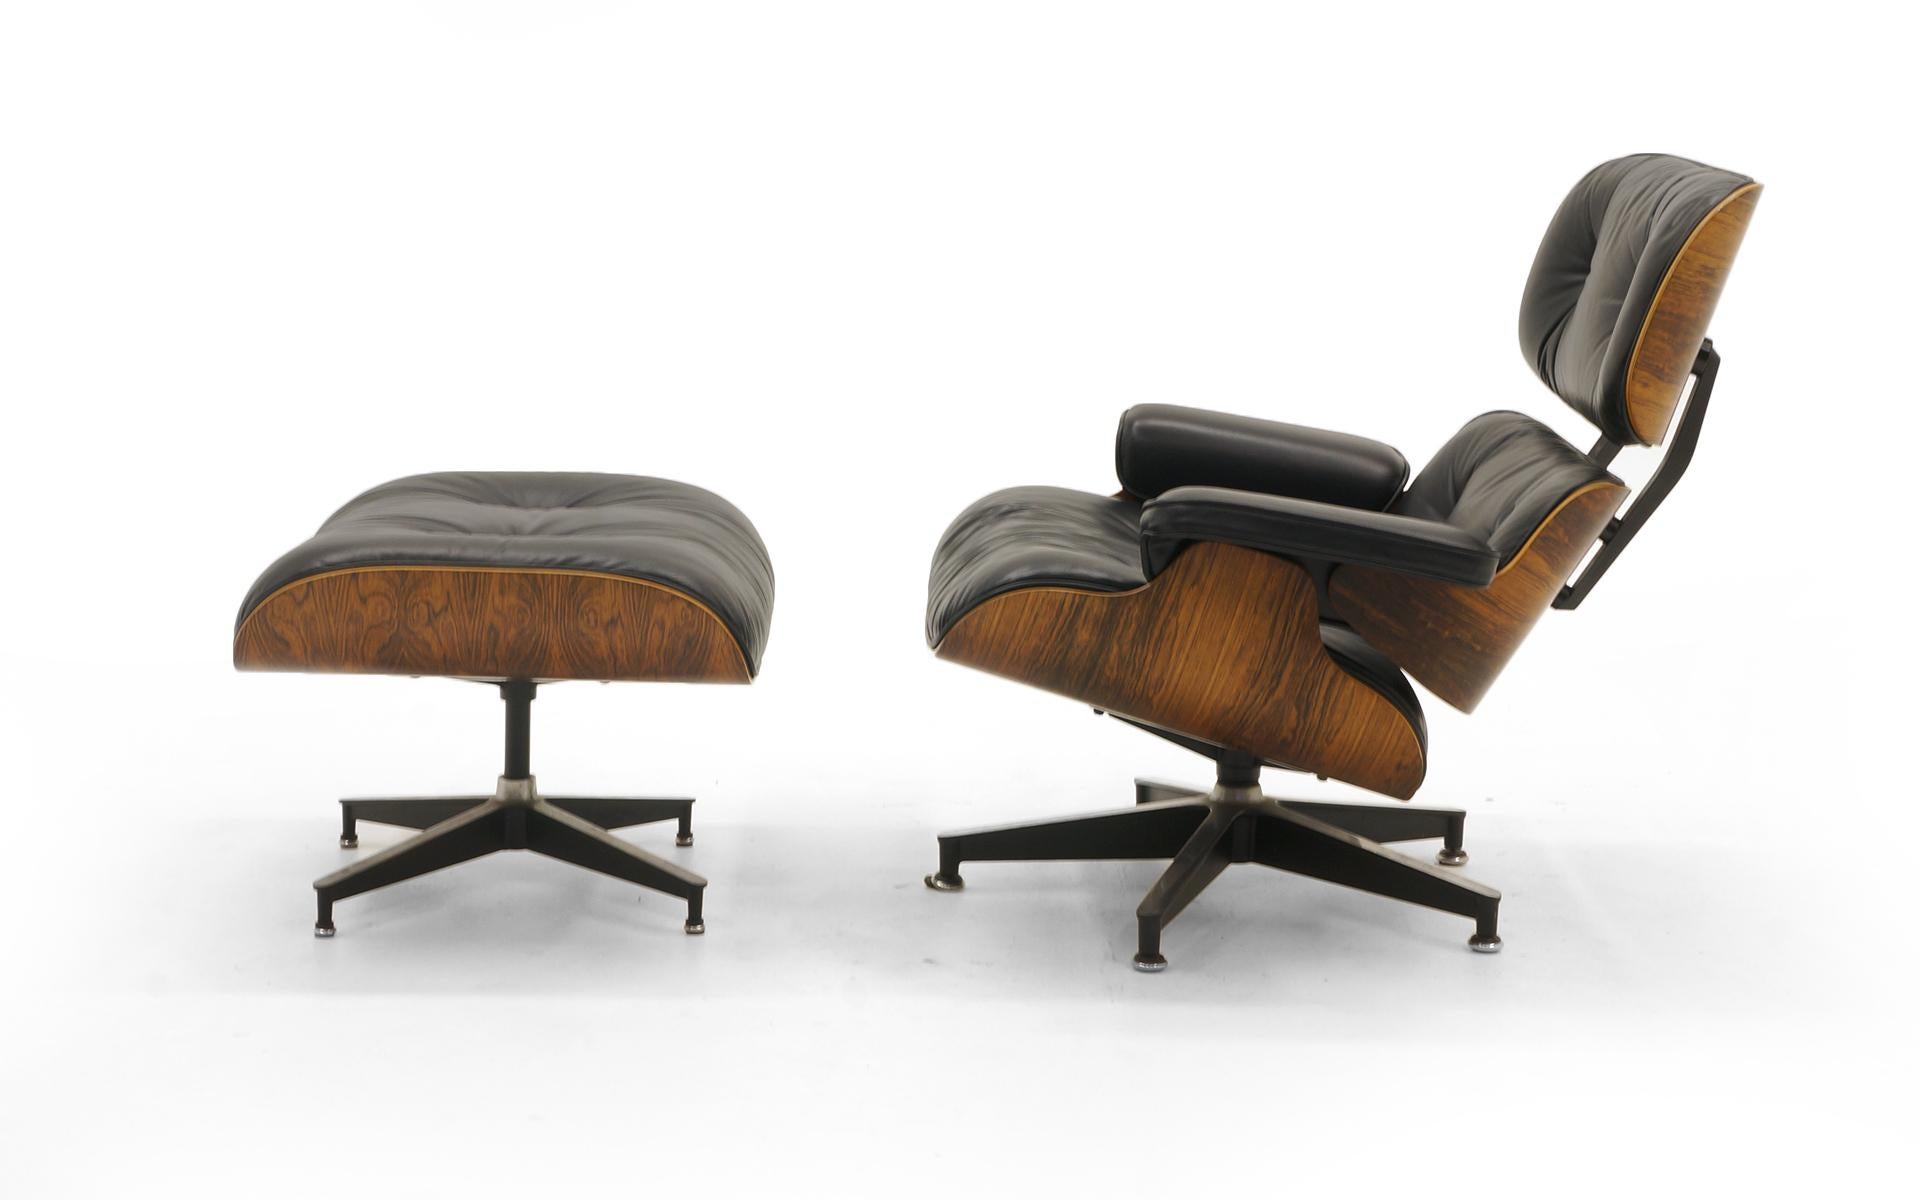 Beautiful original example of the Classic Charles and Ray Eames lounge chair and ottoman for Herman Miller. Brazilian rosewood and black leather. The original leather has been professionally restored. This is a great example from the 1970s.